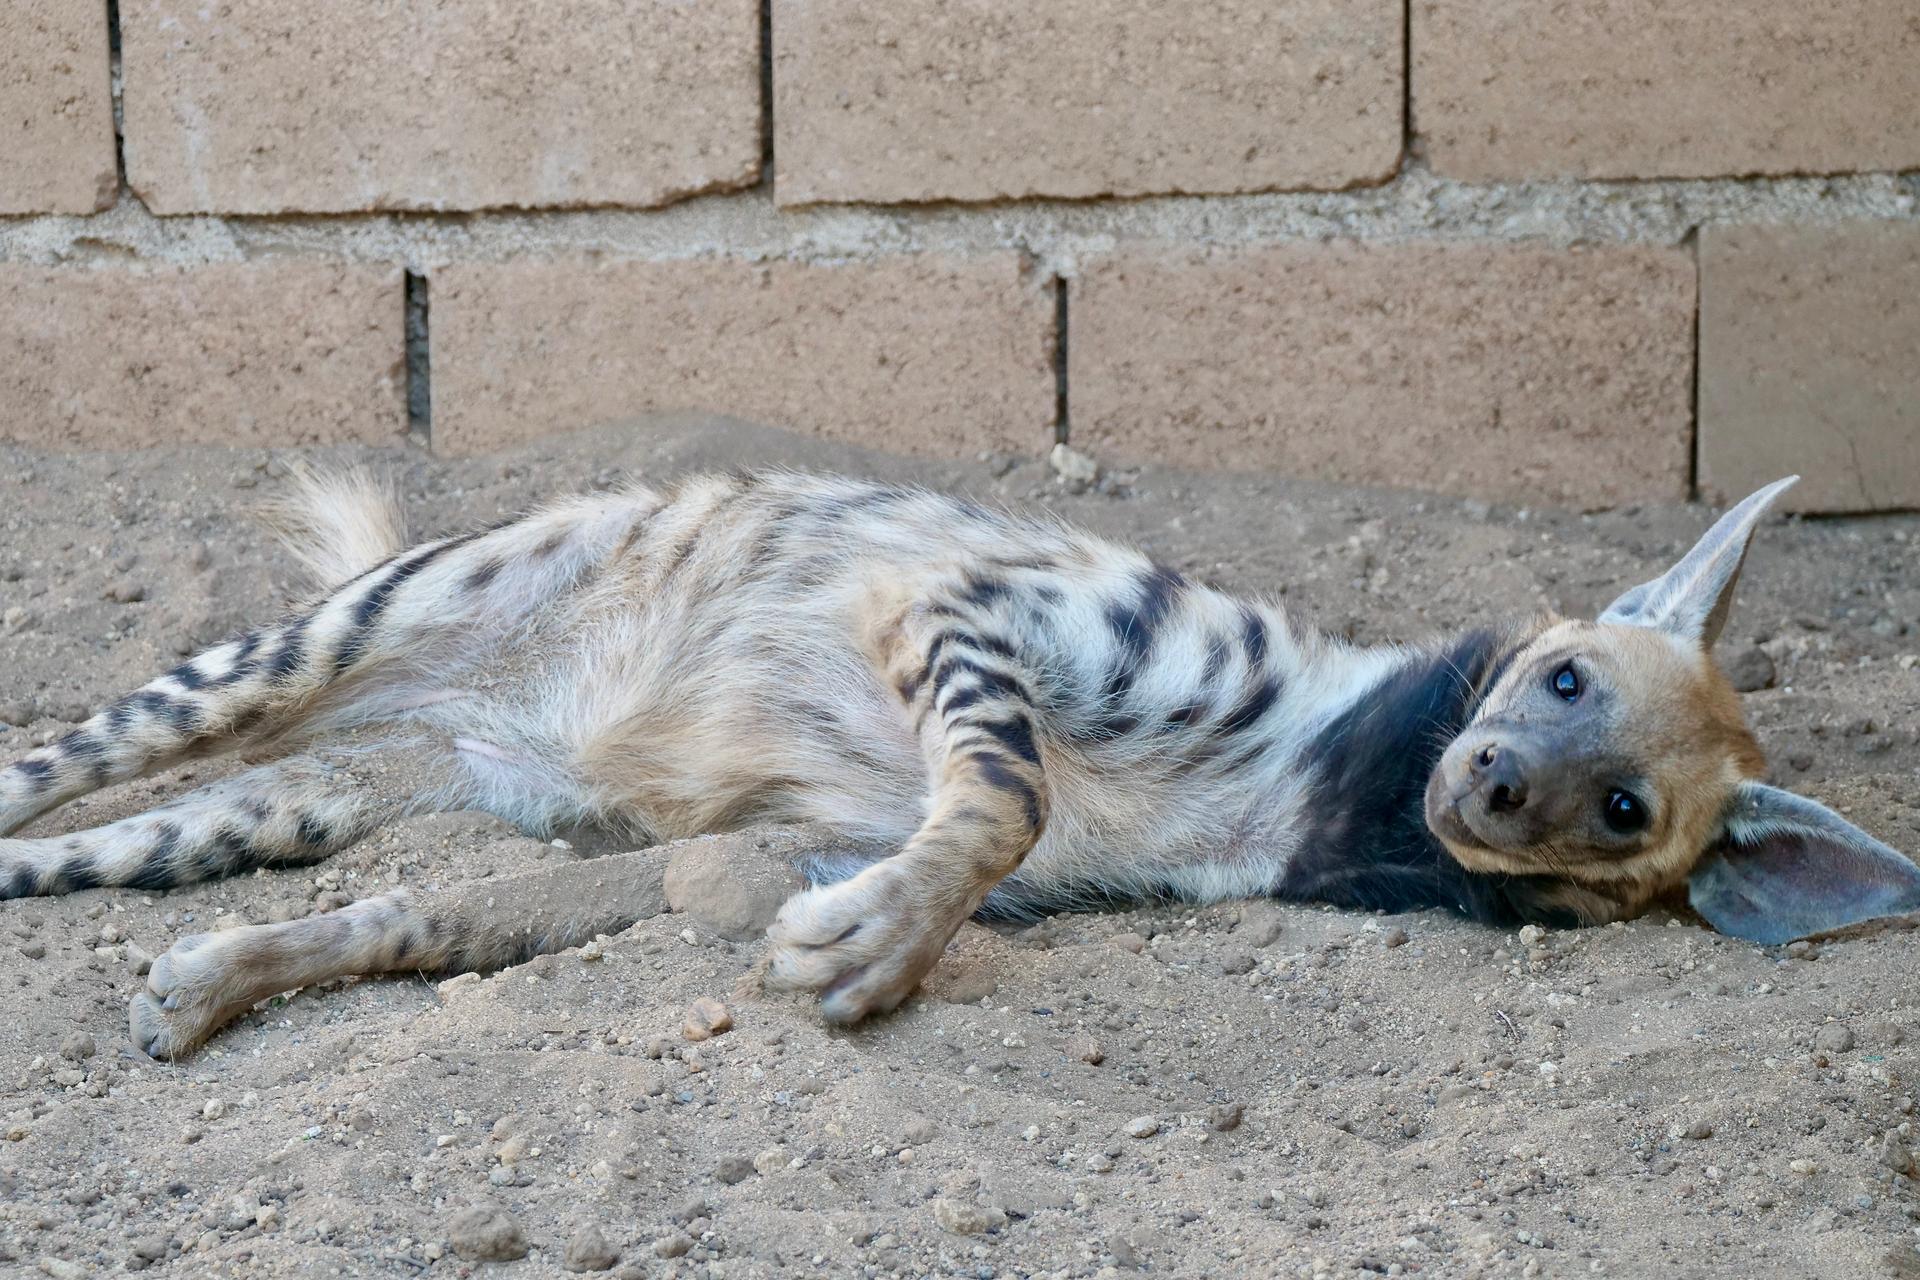 Young Bita plays on the ground. She was a house pet before she was brought to the Sudan Animal Rescue, Khartoum, Sudan